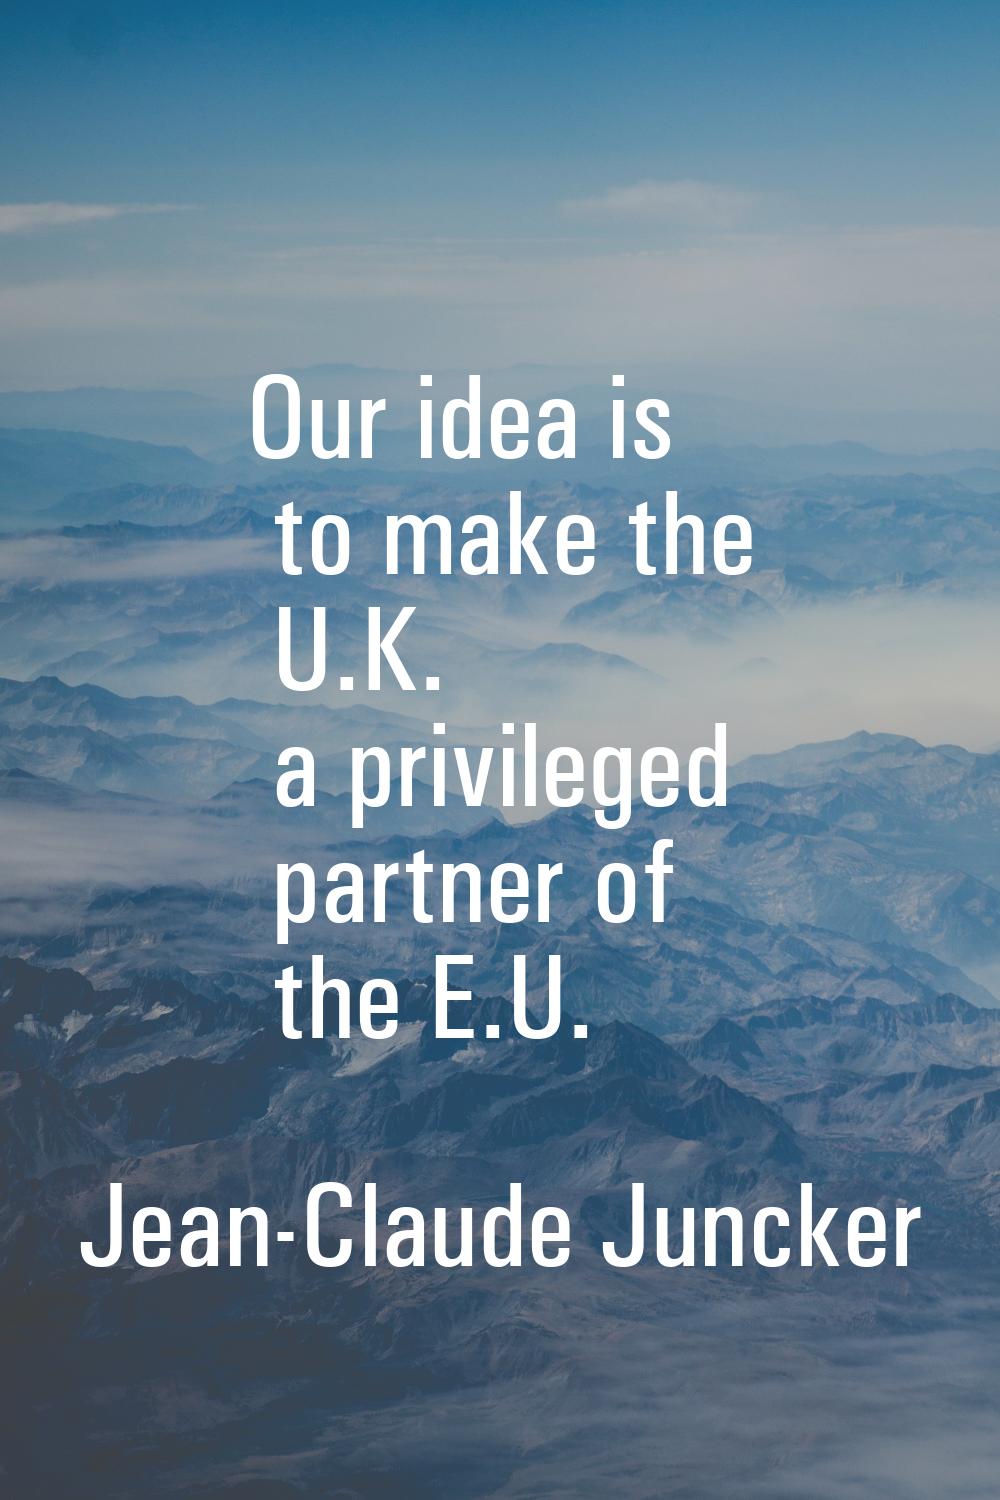 Our idea is to make the U.K. a privileged partner of the E.U.